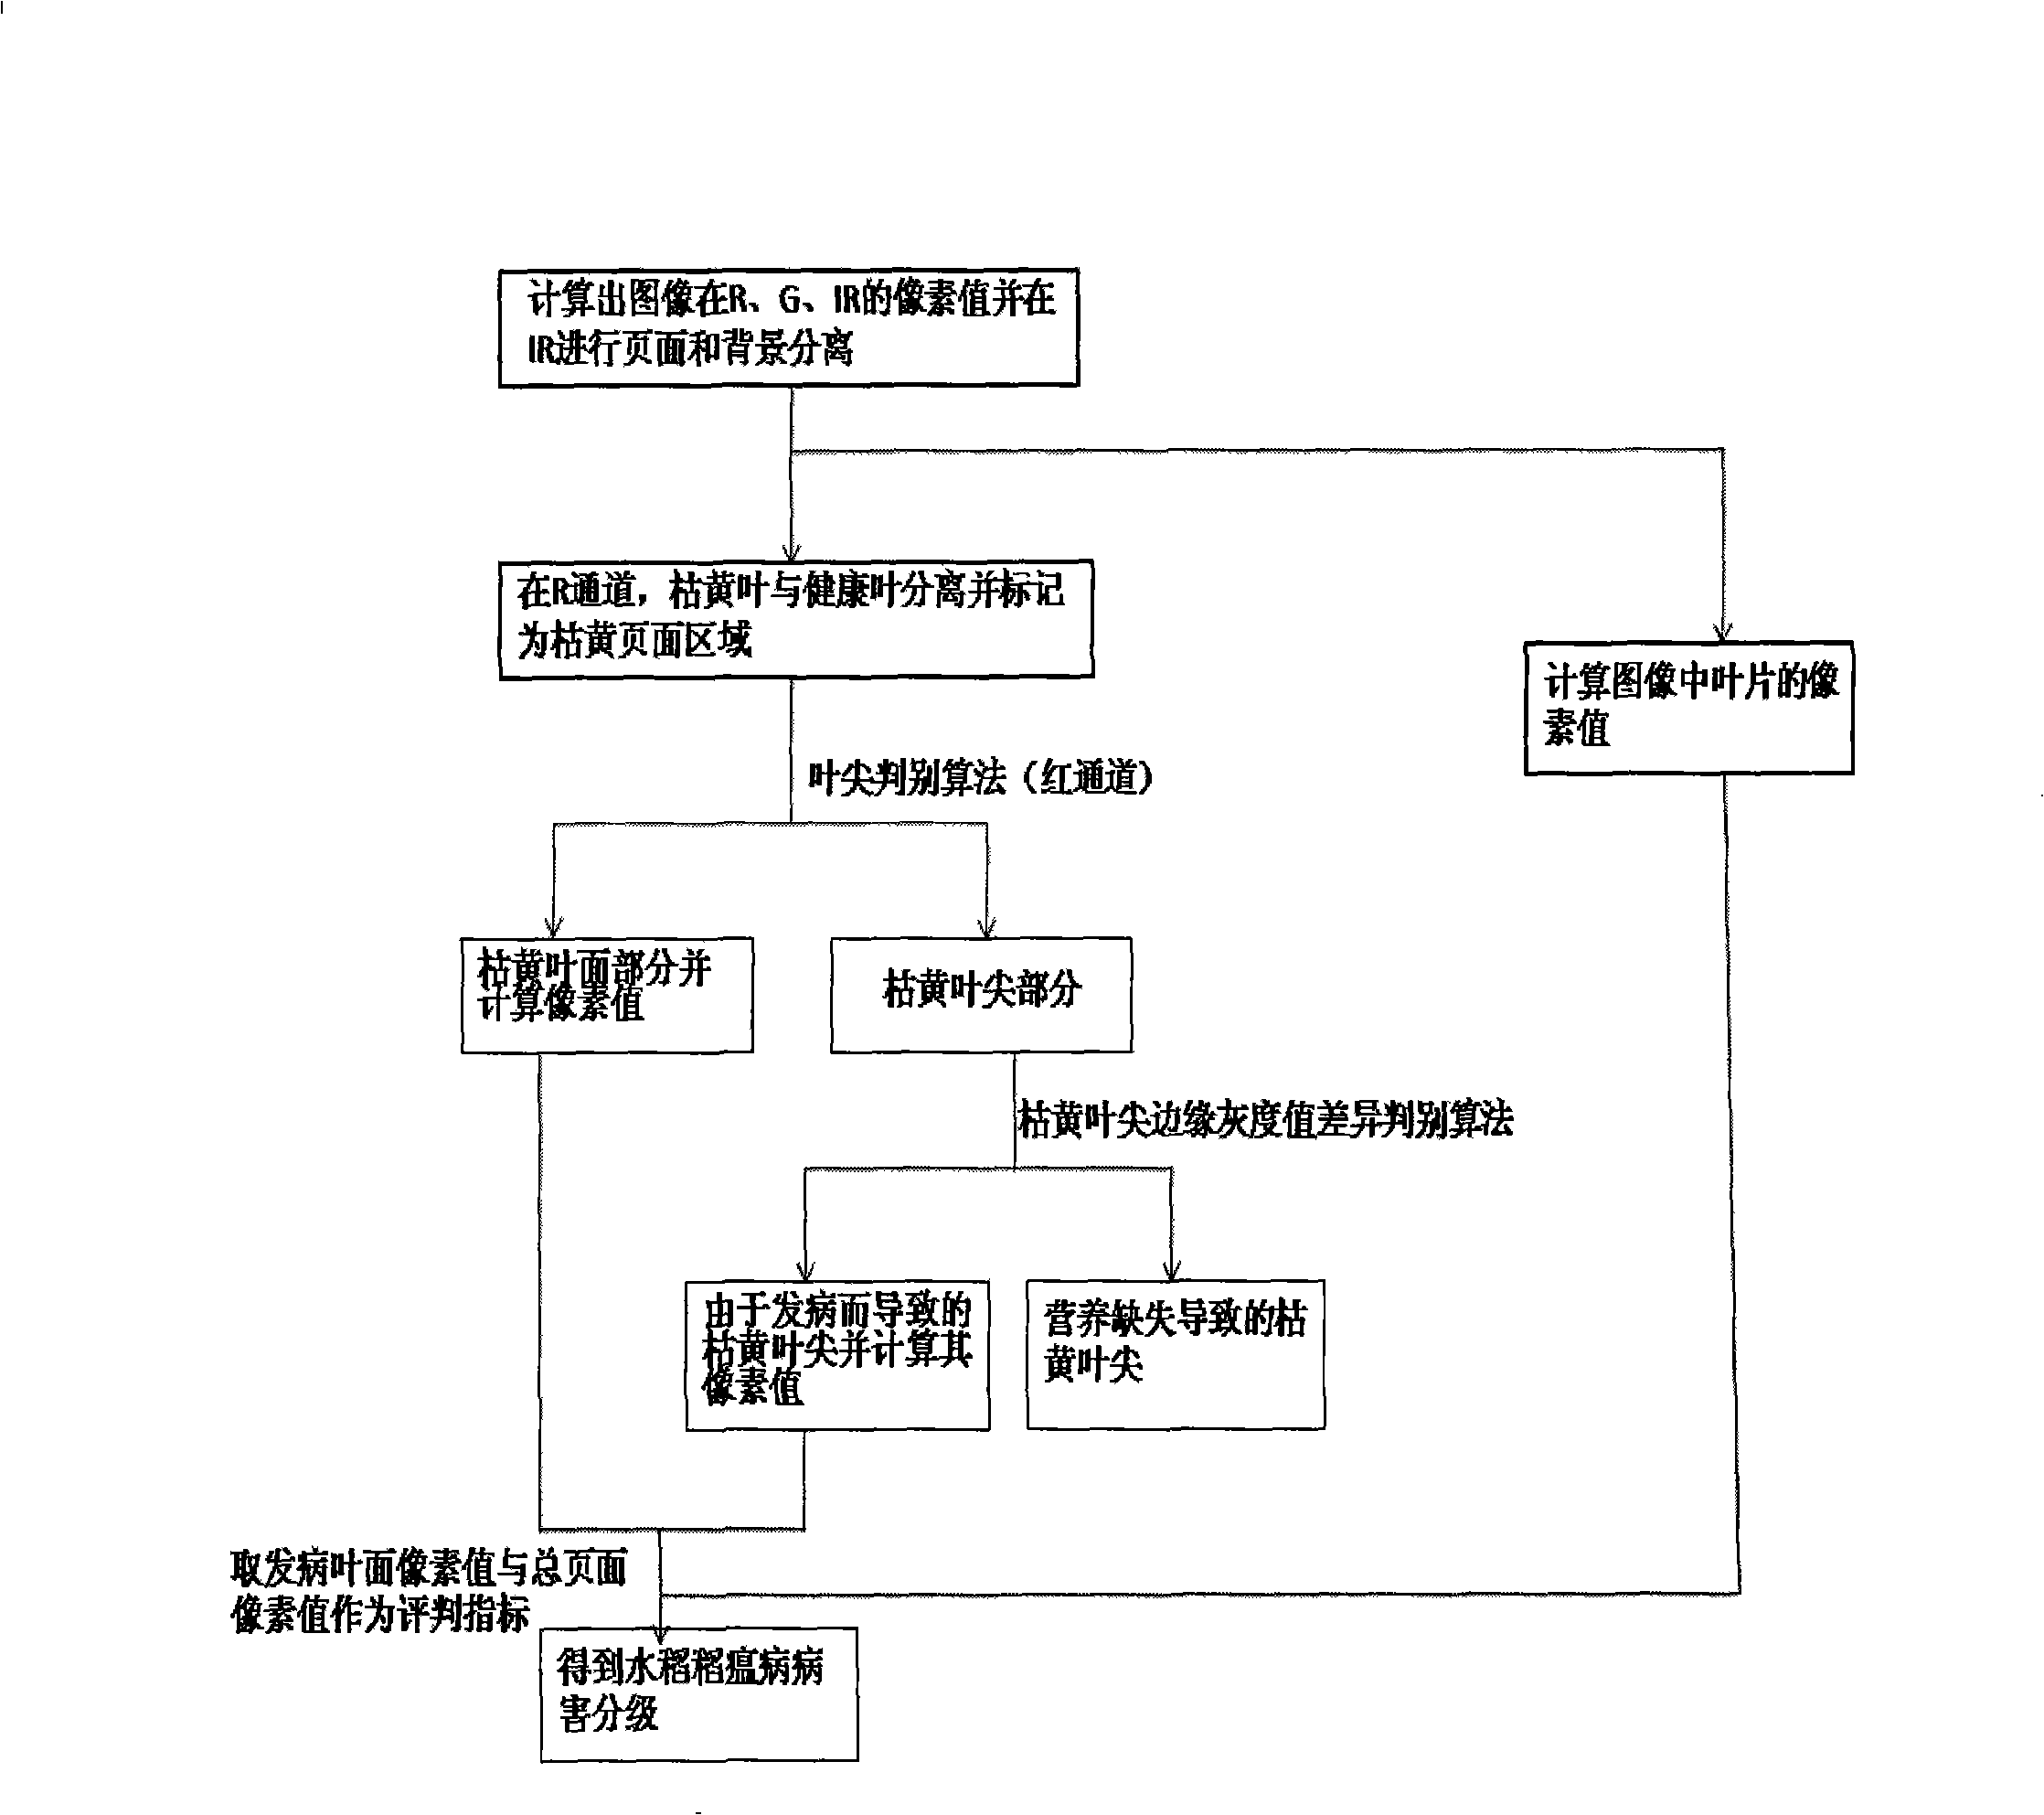 Rice leaf blast detection and classification method based on multi-spectral image processing